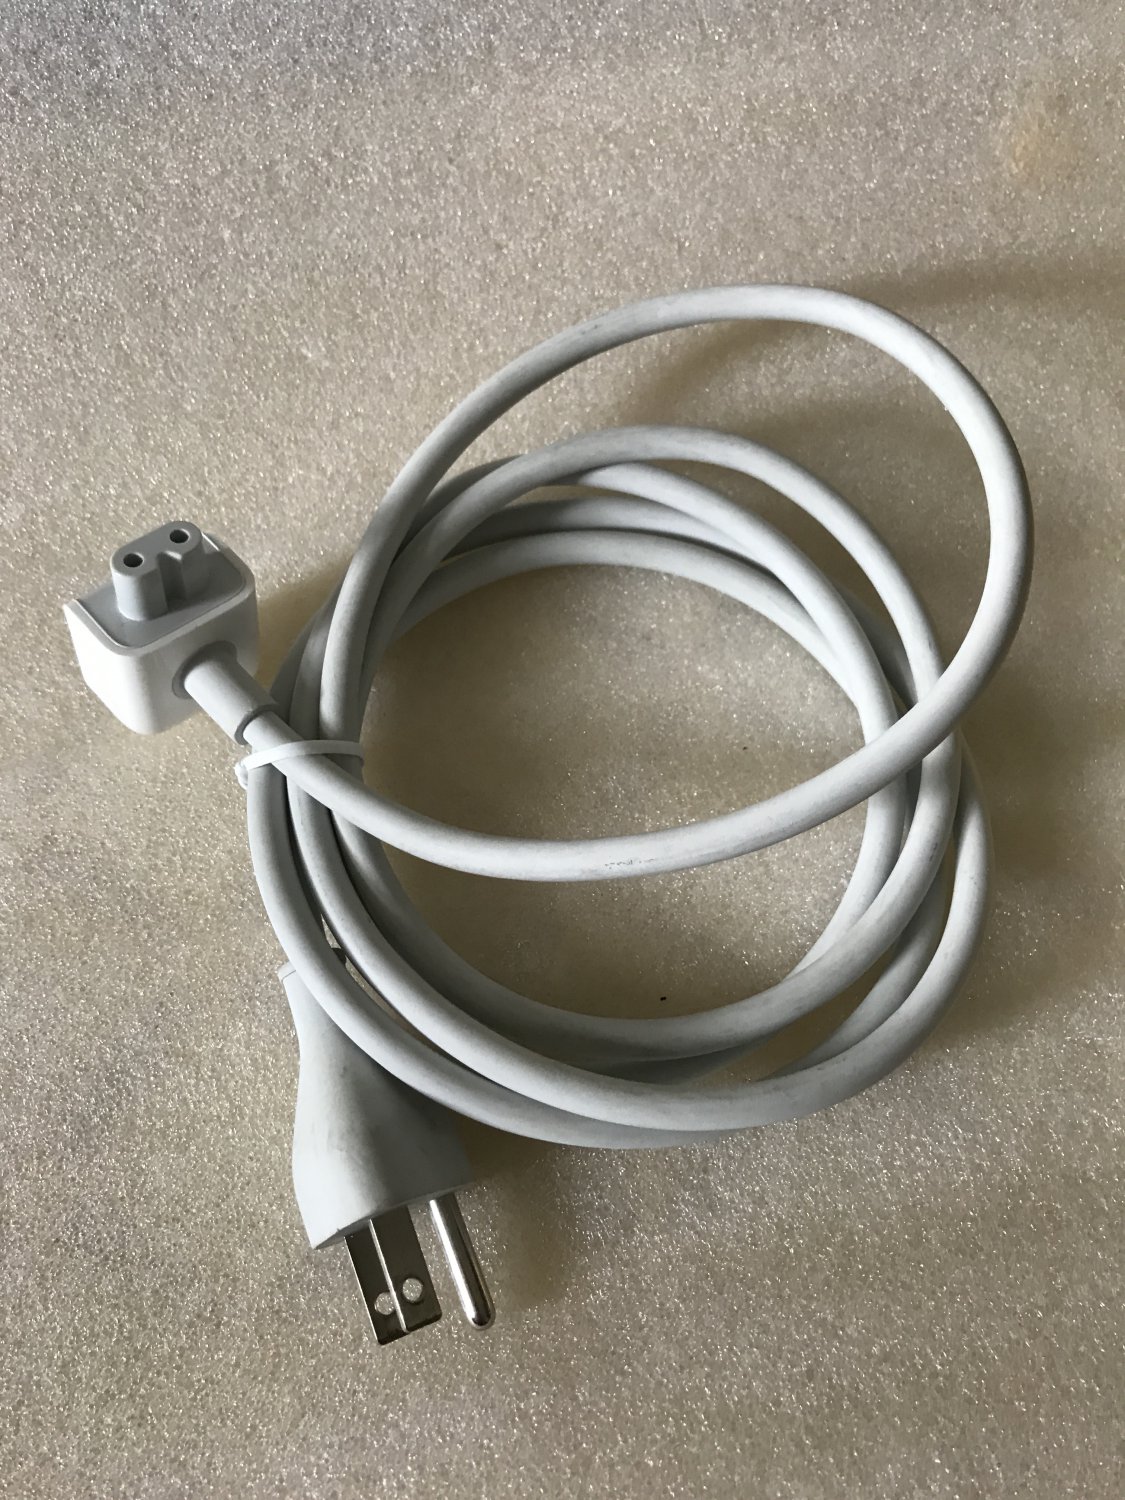 Apple Power Adapter Extension Cable Genuine AC Power Cord 01 622-0168 2.5A 125V